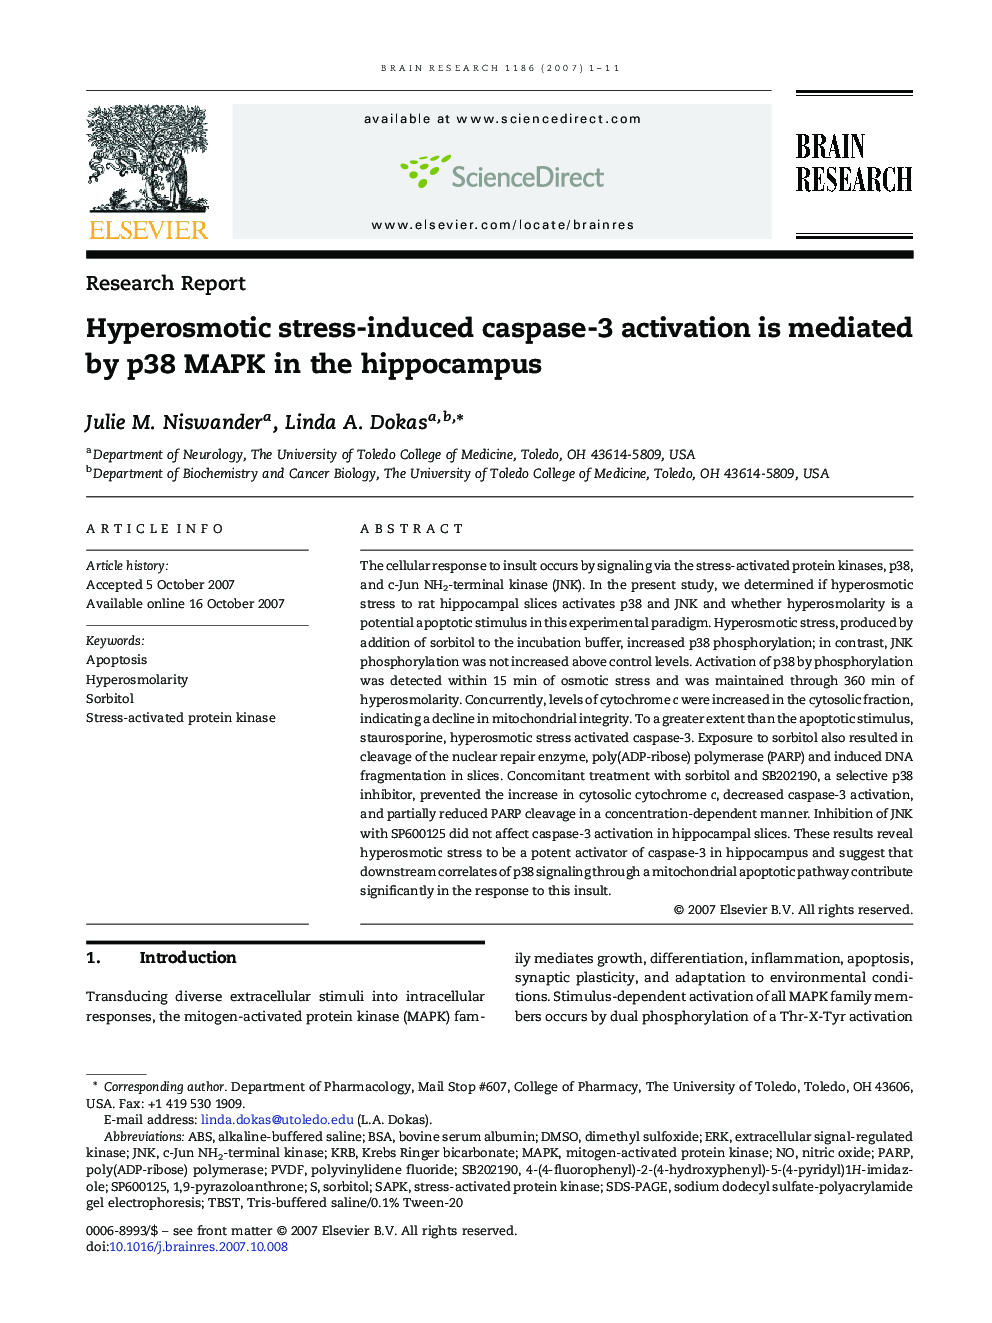 Hyperosmotic stress-induced caspase-3 activation is mediated by p38 MAPK in the hippocampus